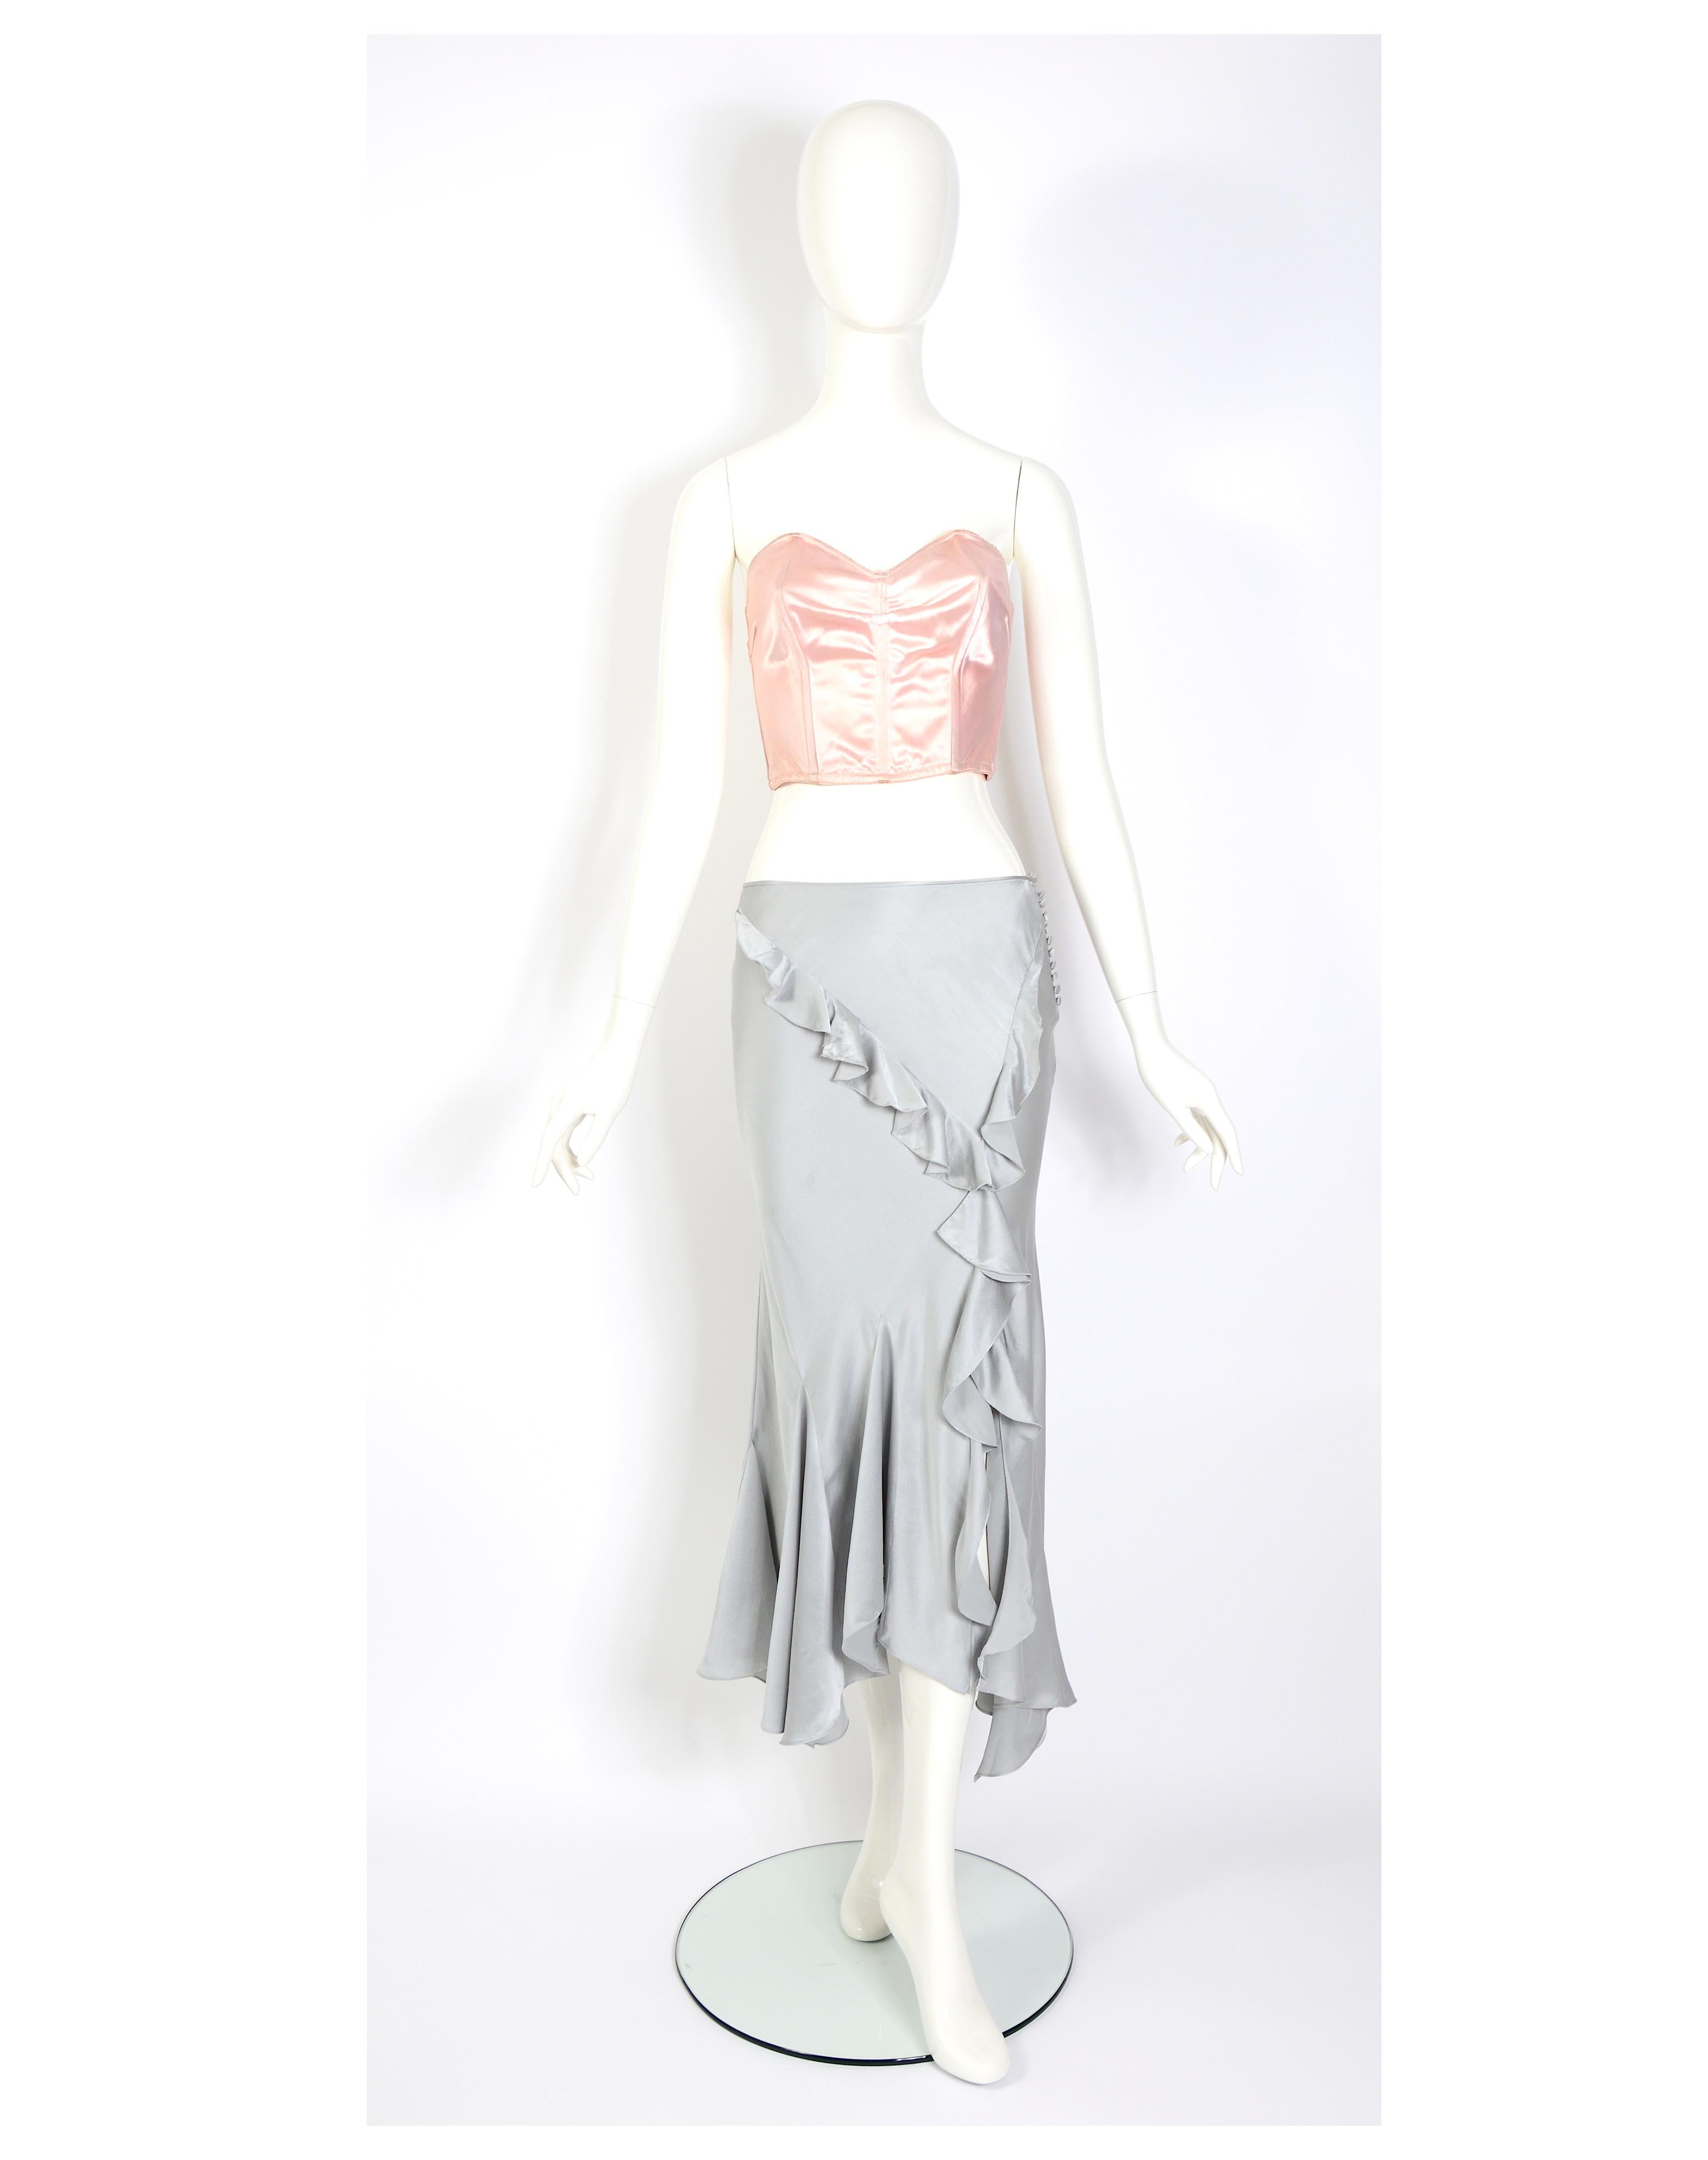 Verlaine Vintage is thrilled to present a stunning vintage piece from Christian Dior, designed by John Galliano. This exquisite silk satin skirt features elegant ruffles and is cut on the bias for a flattering fit. The low waist adds a touch of